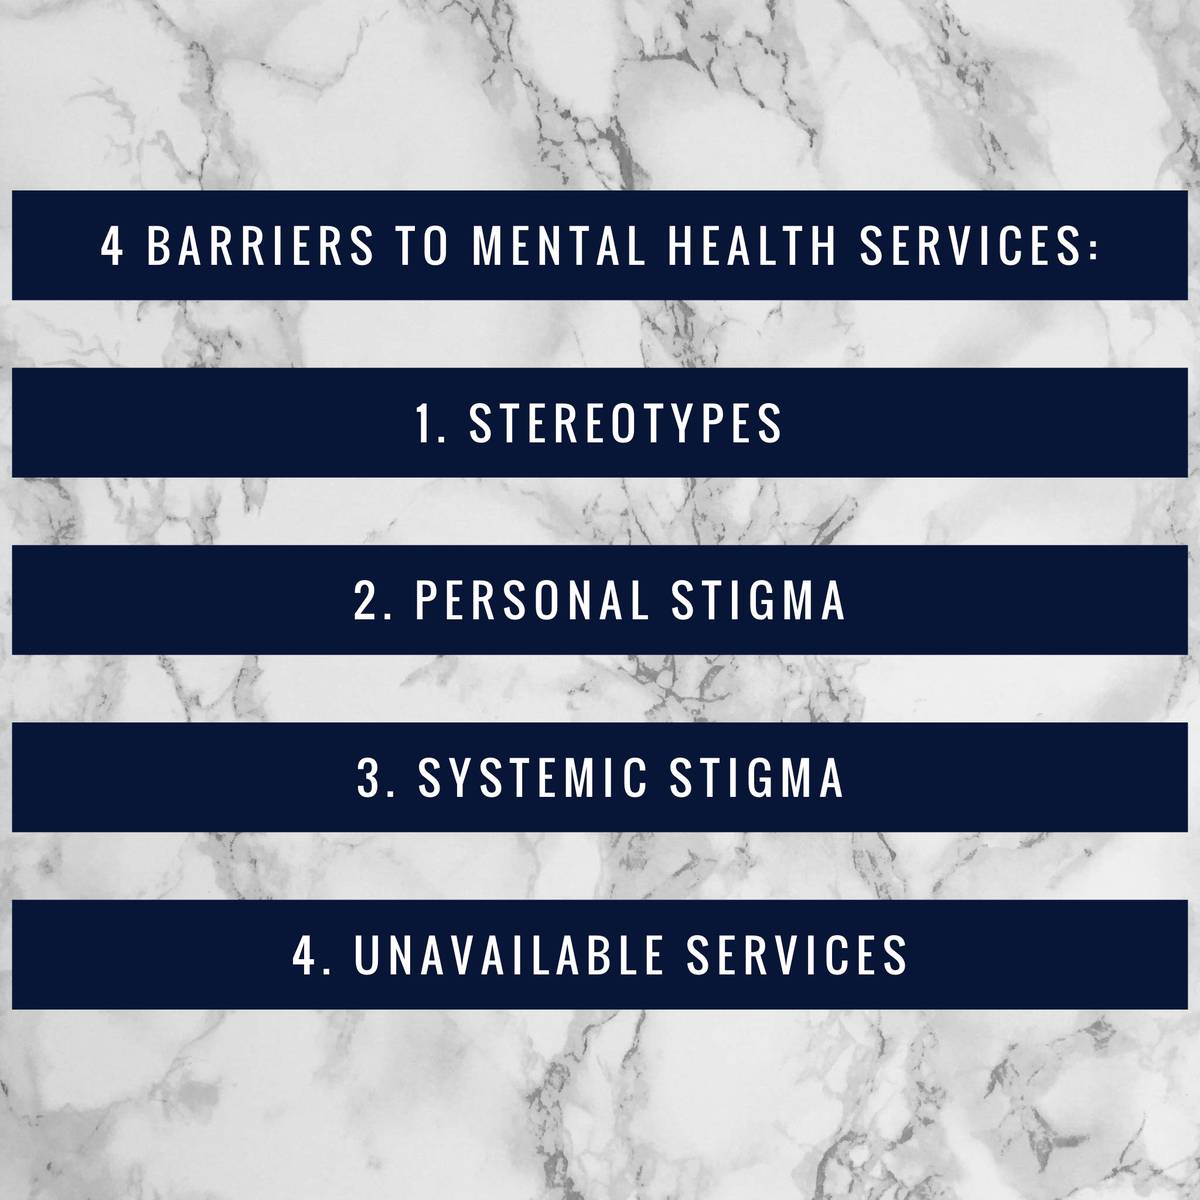 Dr. Behrman shared the 4 main barriers to Mental Health Services, listed here